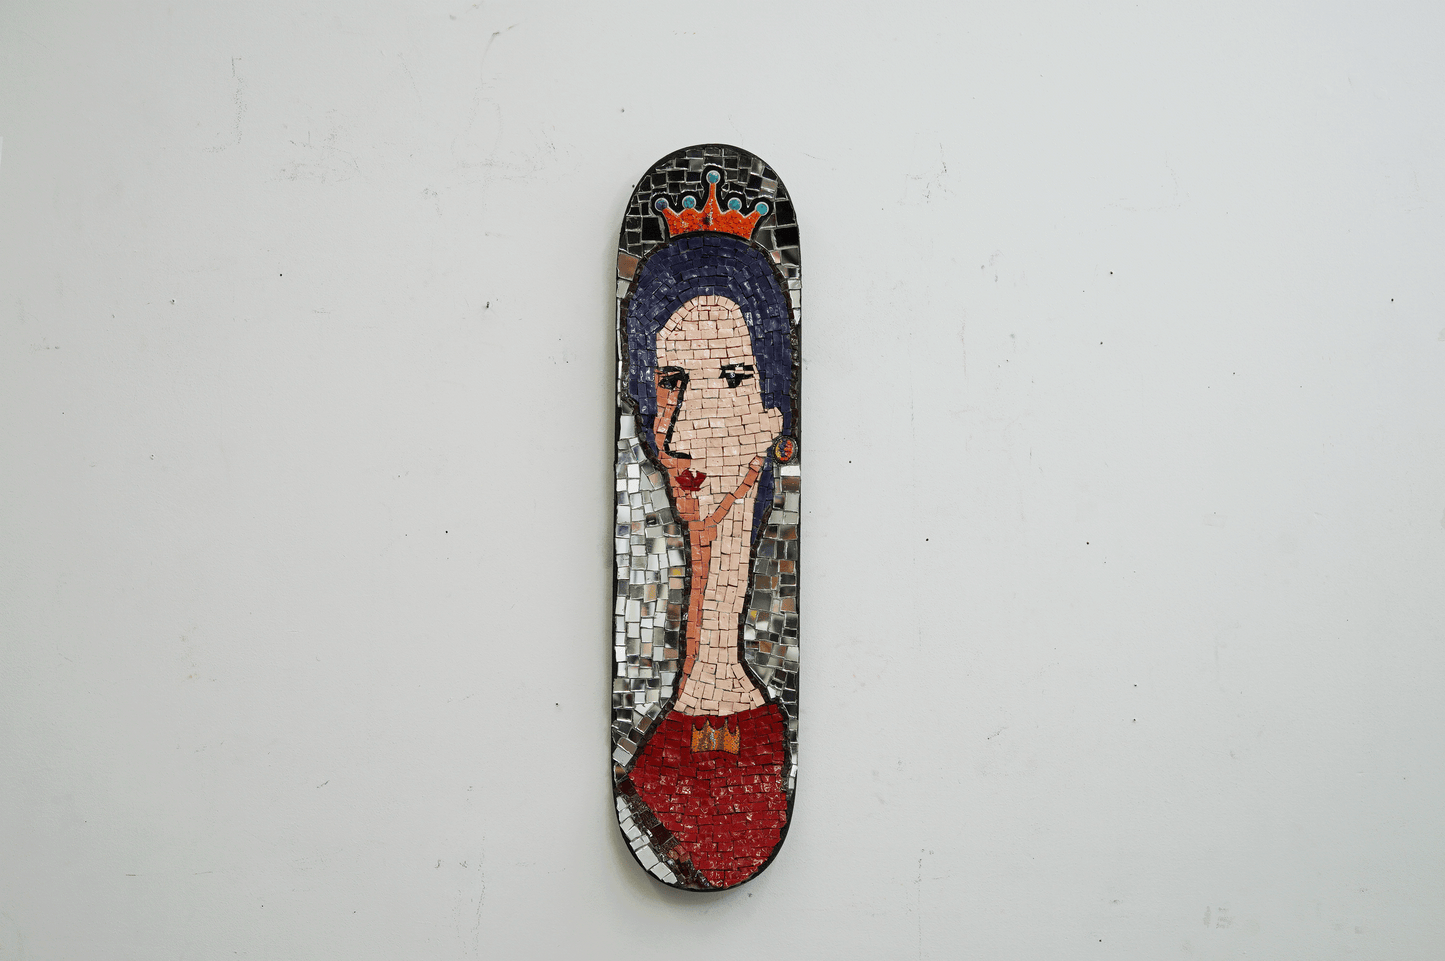 skateboard mosaic portrait of a woman with elongated face with a crown and red dress